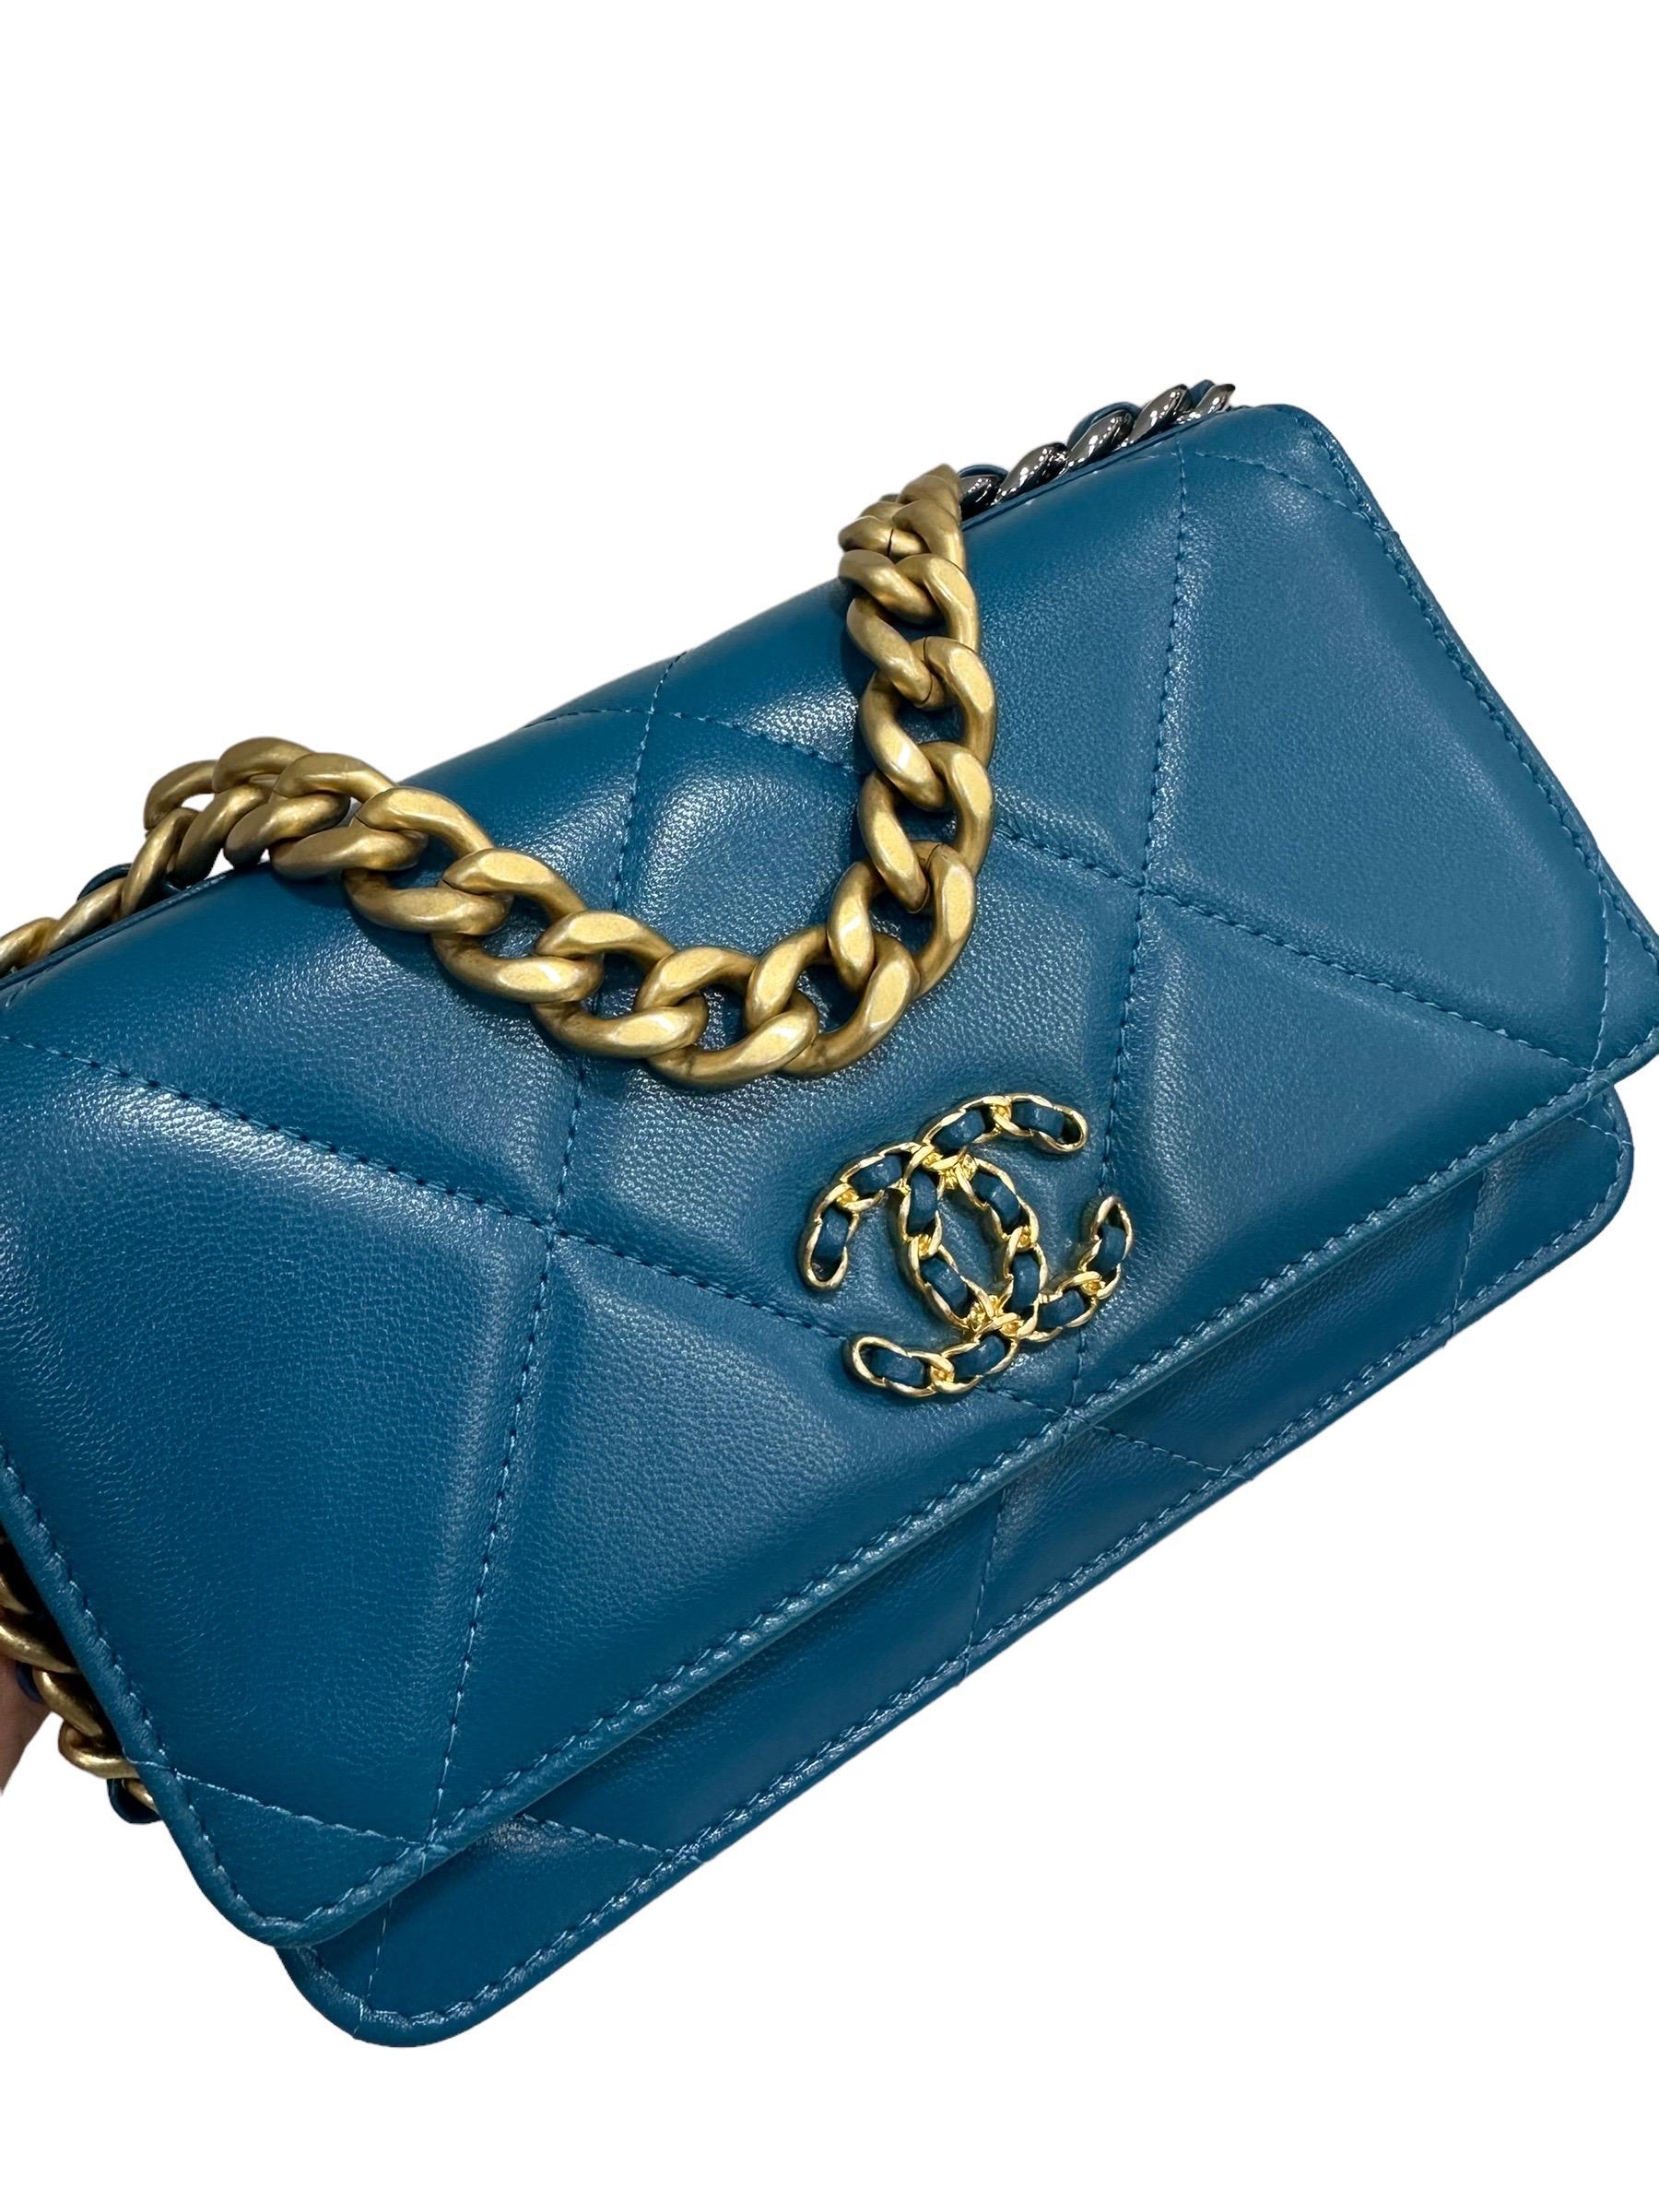 

Chanel signed bag, line 19, made of quilted blue lambskin with bicolor gold and silver hardware. Equipped with a front flap with magnetic button closure, internally lined in smooth blue leather, with card holder pockets and pocket with zip